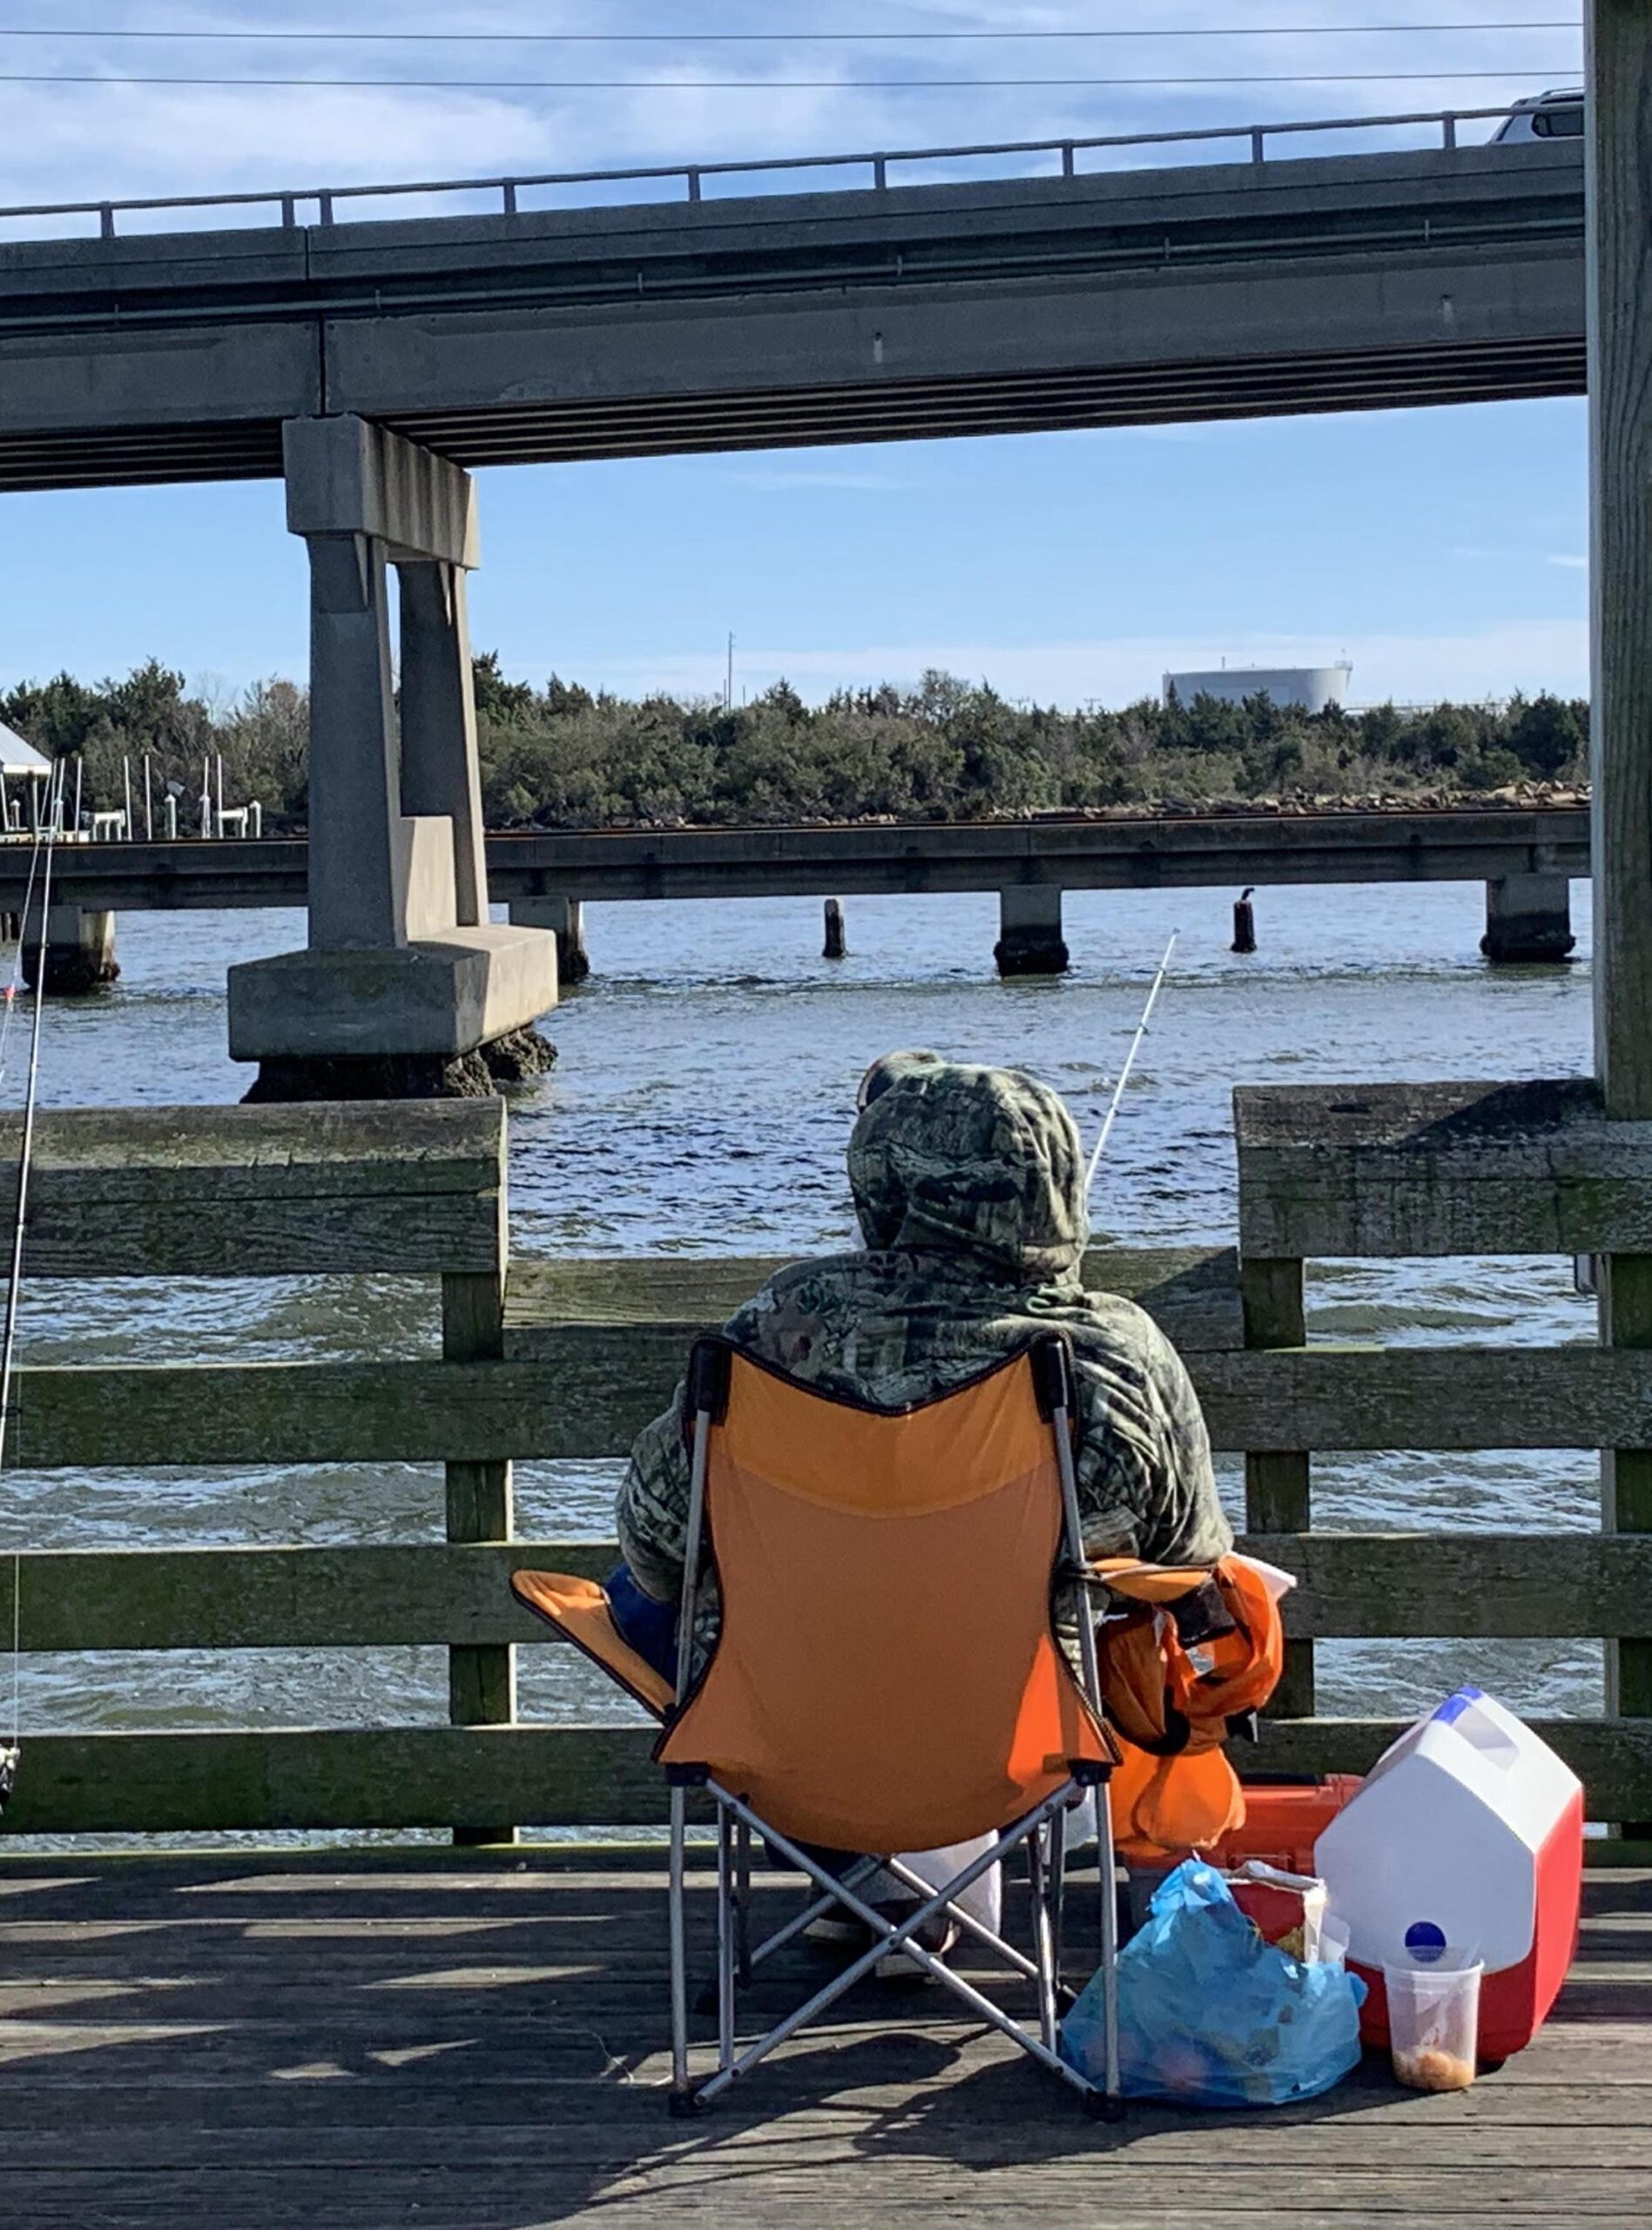 A fisherman settles in for a day of fishing at the Newport River Pier in Carteret County, NC.